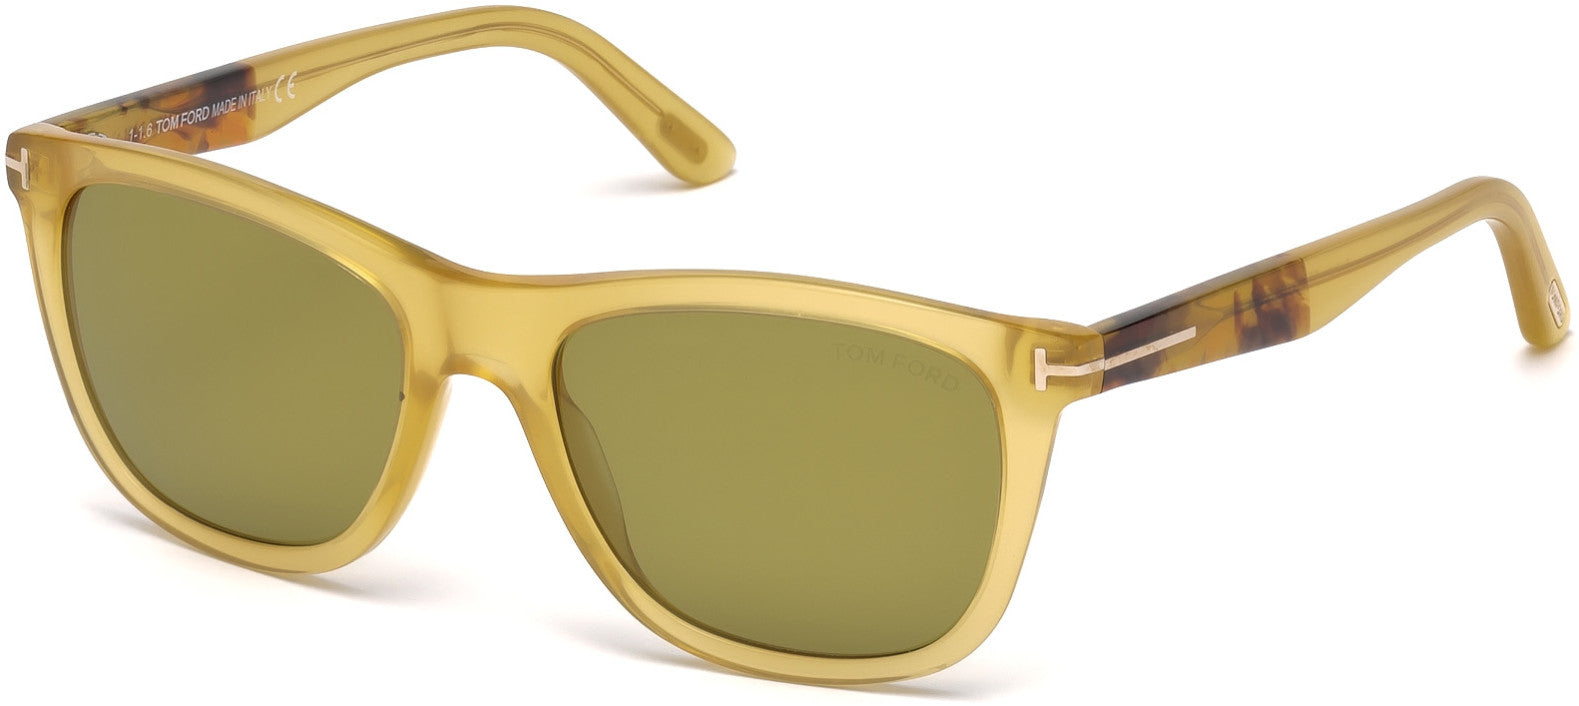 Sunglasses Tom Ford Andrew FT0500 (05J) FT0500 Man | Free Shipping Shop  Online